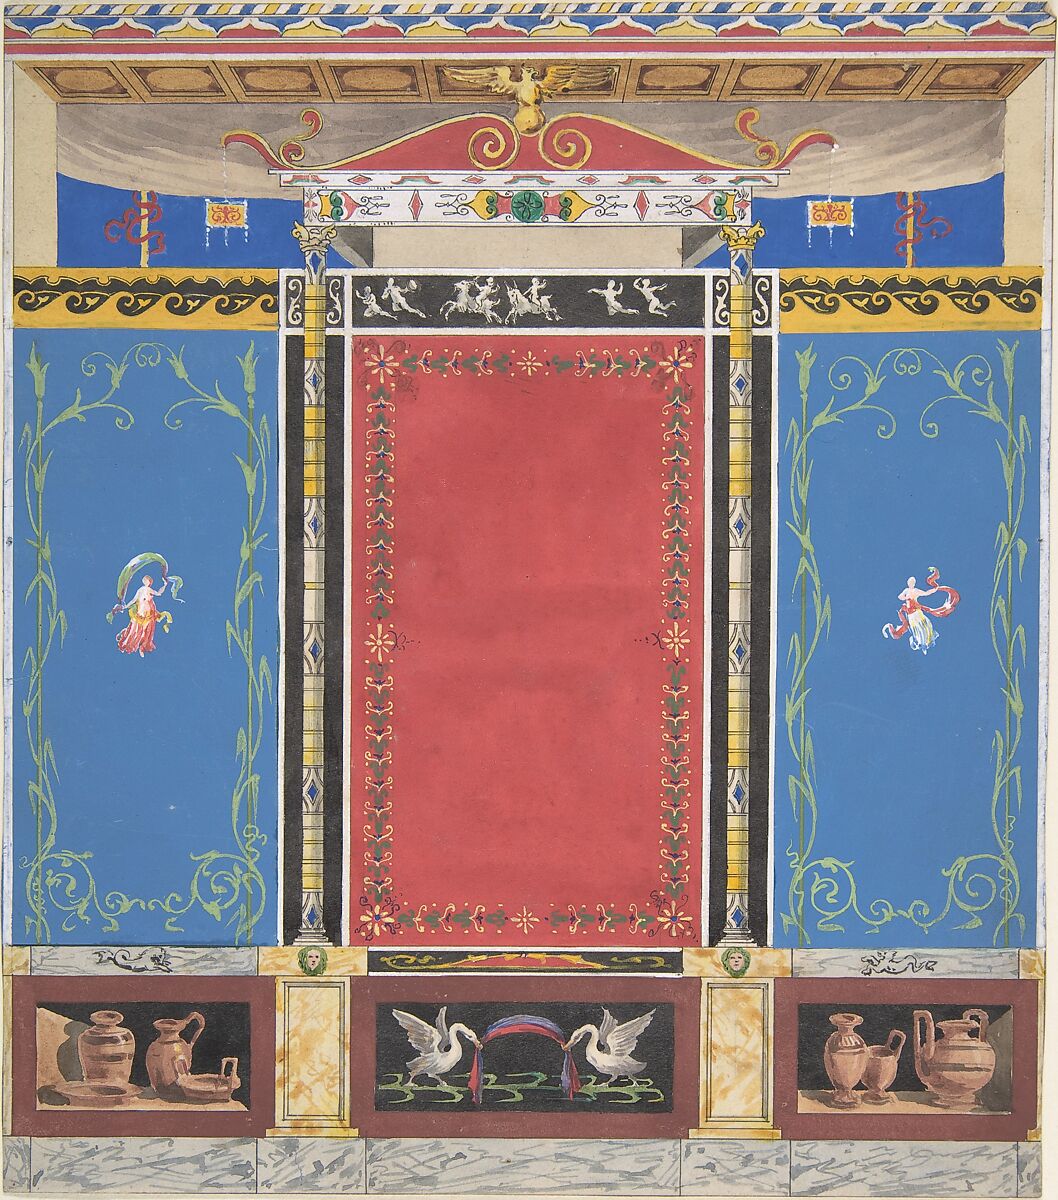 Painted Wall Decor Featuring Thin Column with a Pair of Swans and Trompe L'Oeil Vases at Base, Attributed to Jules-Edmond-Charles Lachaise (French, died 1897), Gouache, watercolor, pen and black ink 